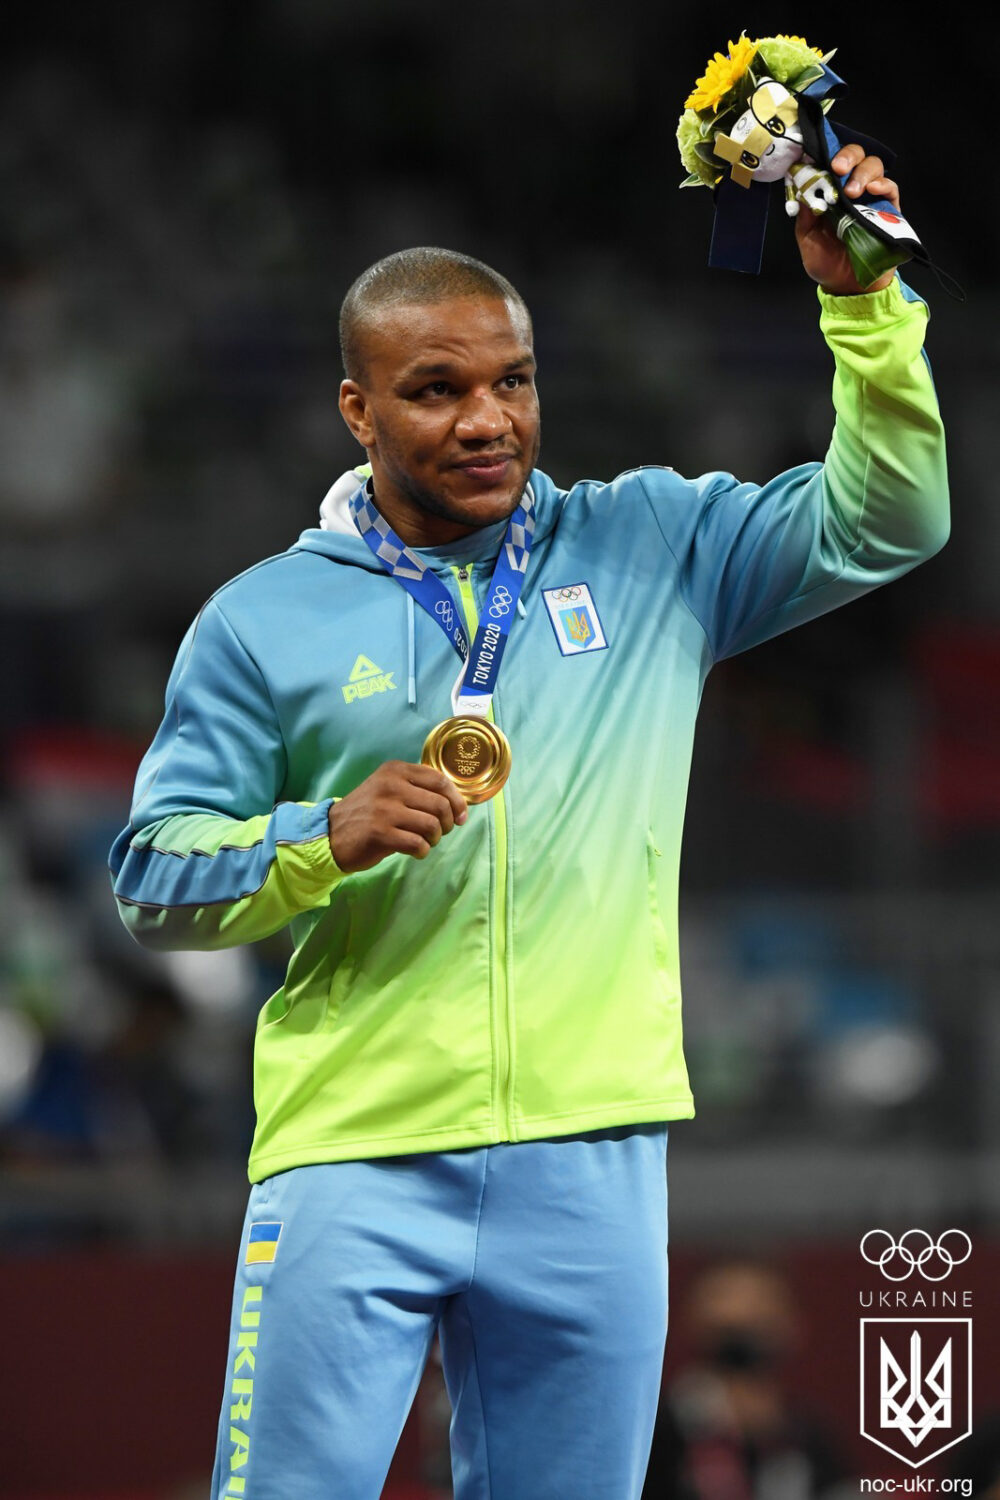 Beleniuk in a green and blue tracksuit holding a bouquet of flowers and presenting a gold medal on a lanyard